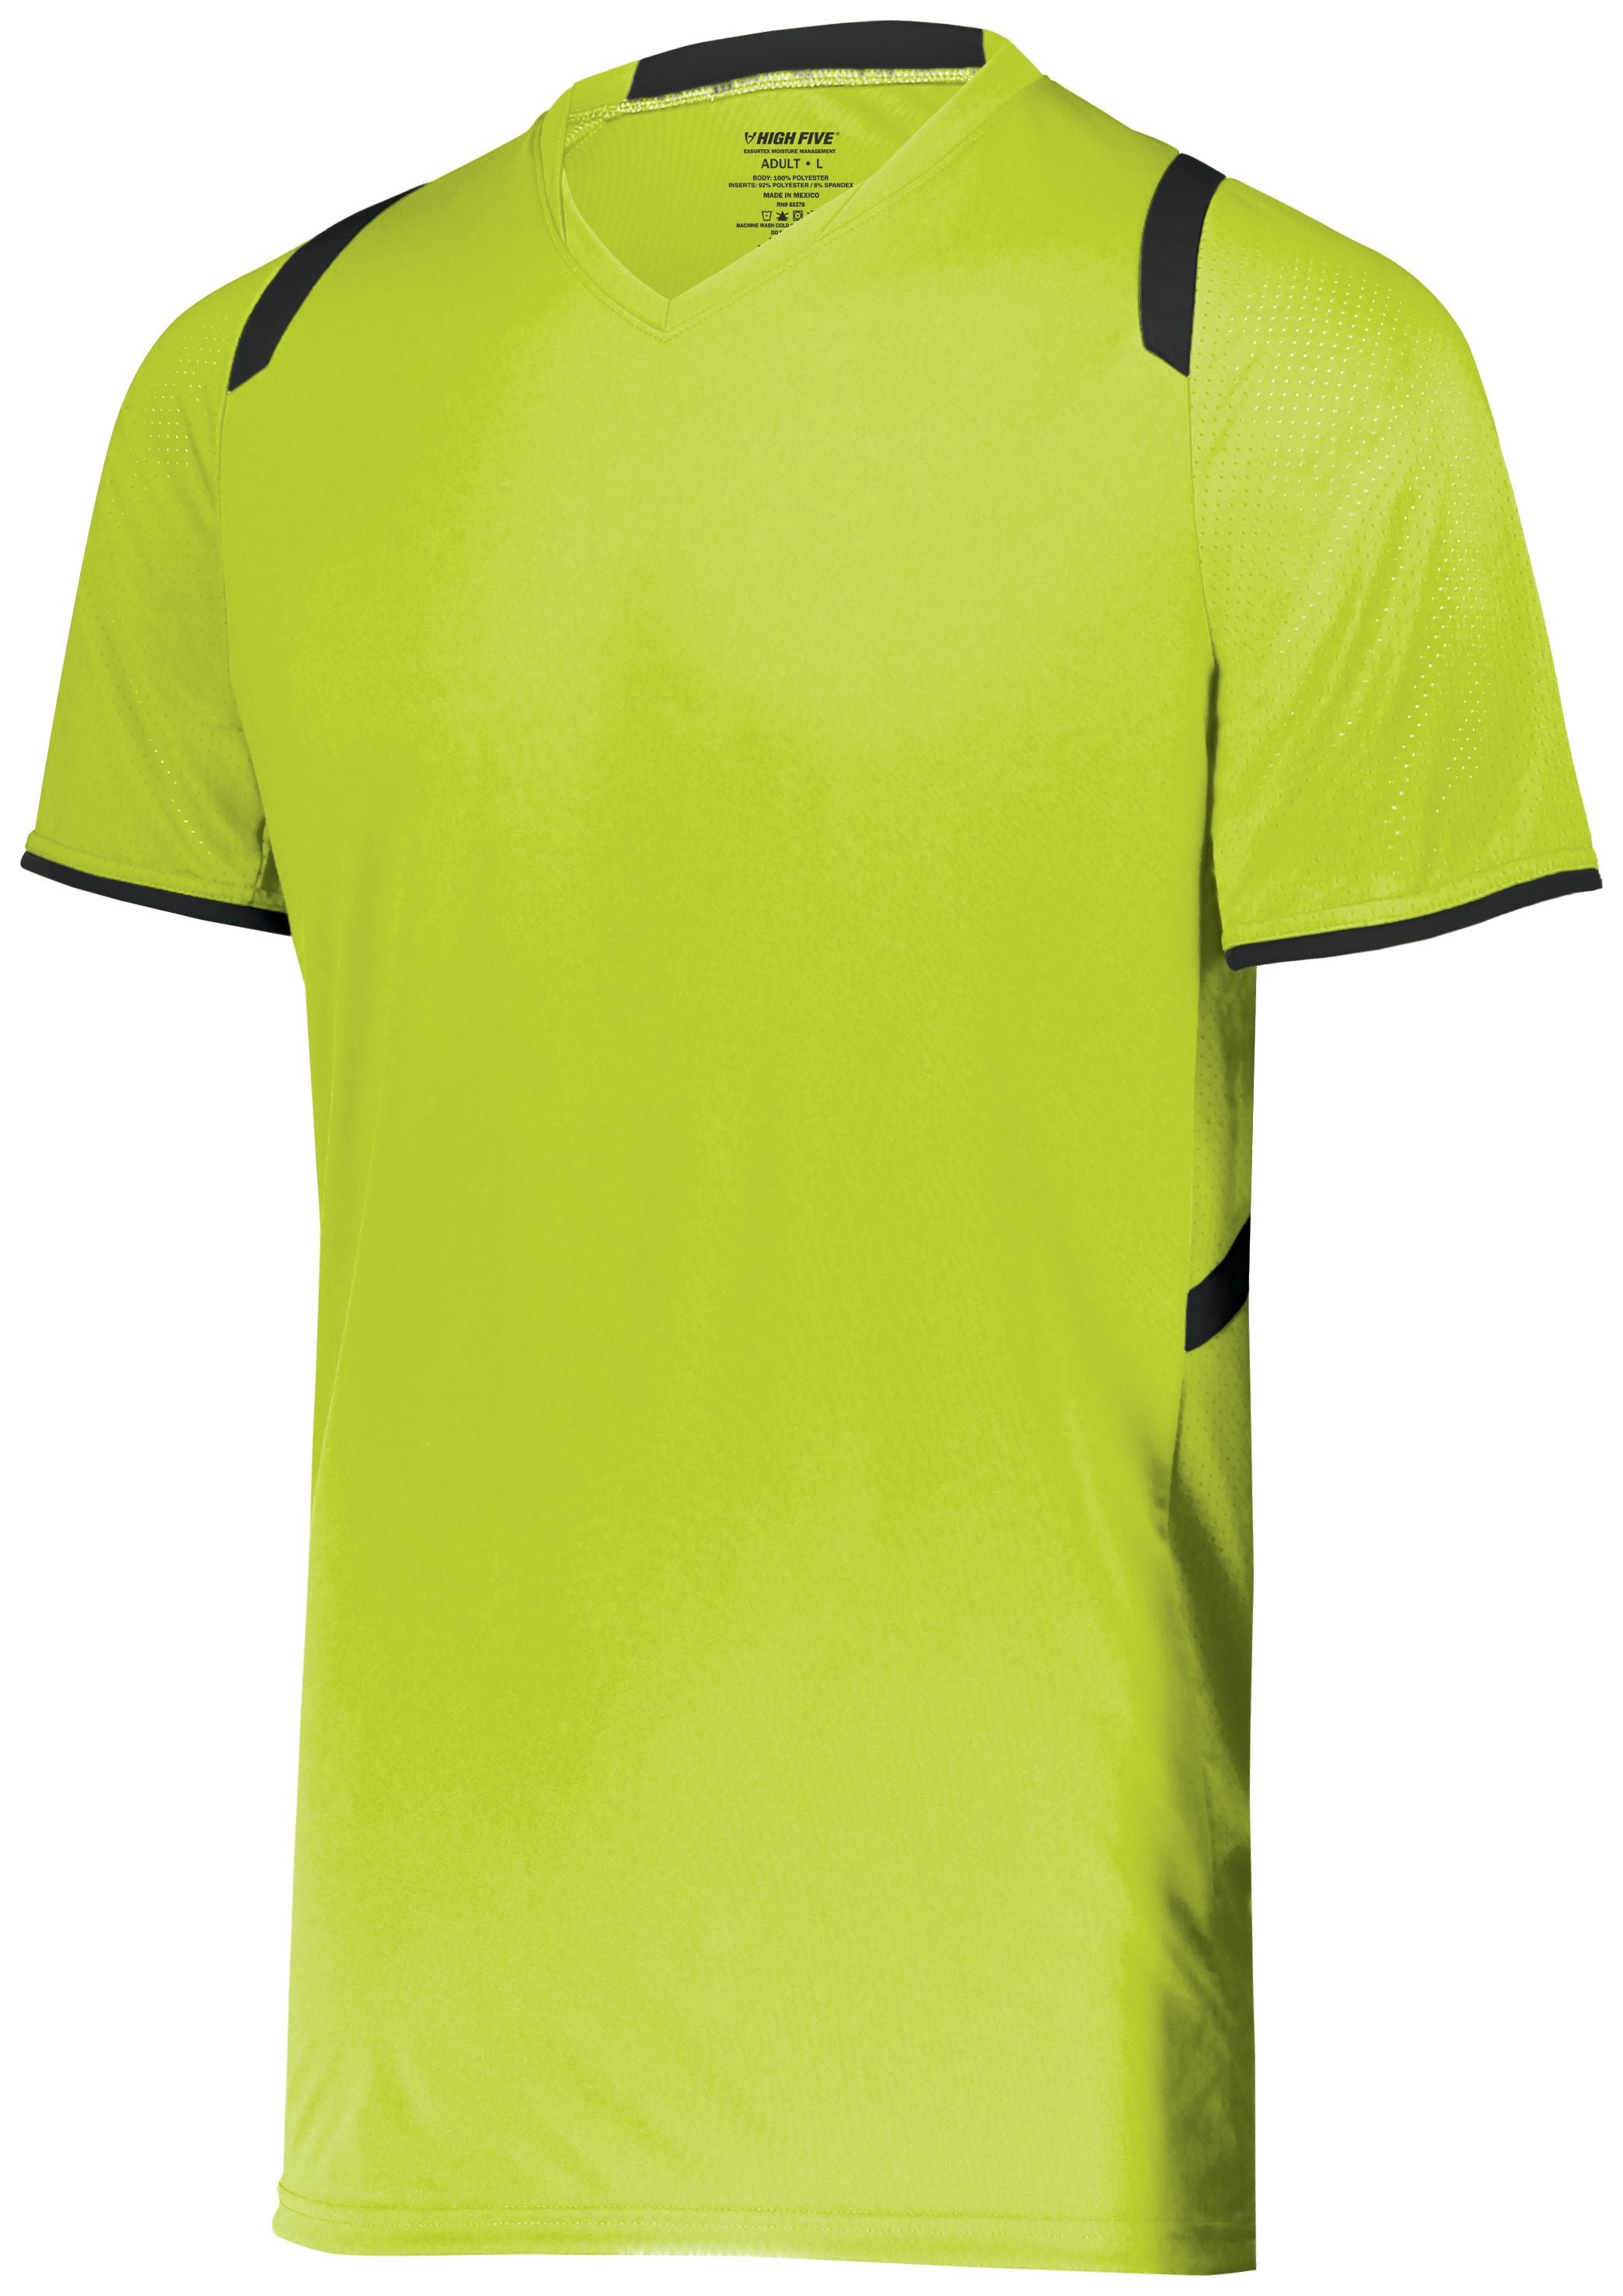 High 5 Youth Millennium Soccer Jersey in Lime/Black  -Part of the Youth, Youth-Jersey, High5-Products, Soccer, Shirts, All-Sports-1 product lines at KanaleyCreations.com